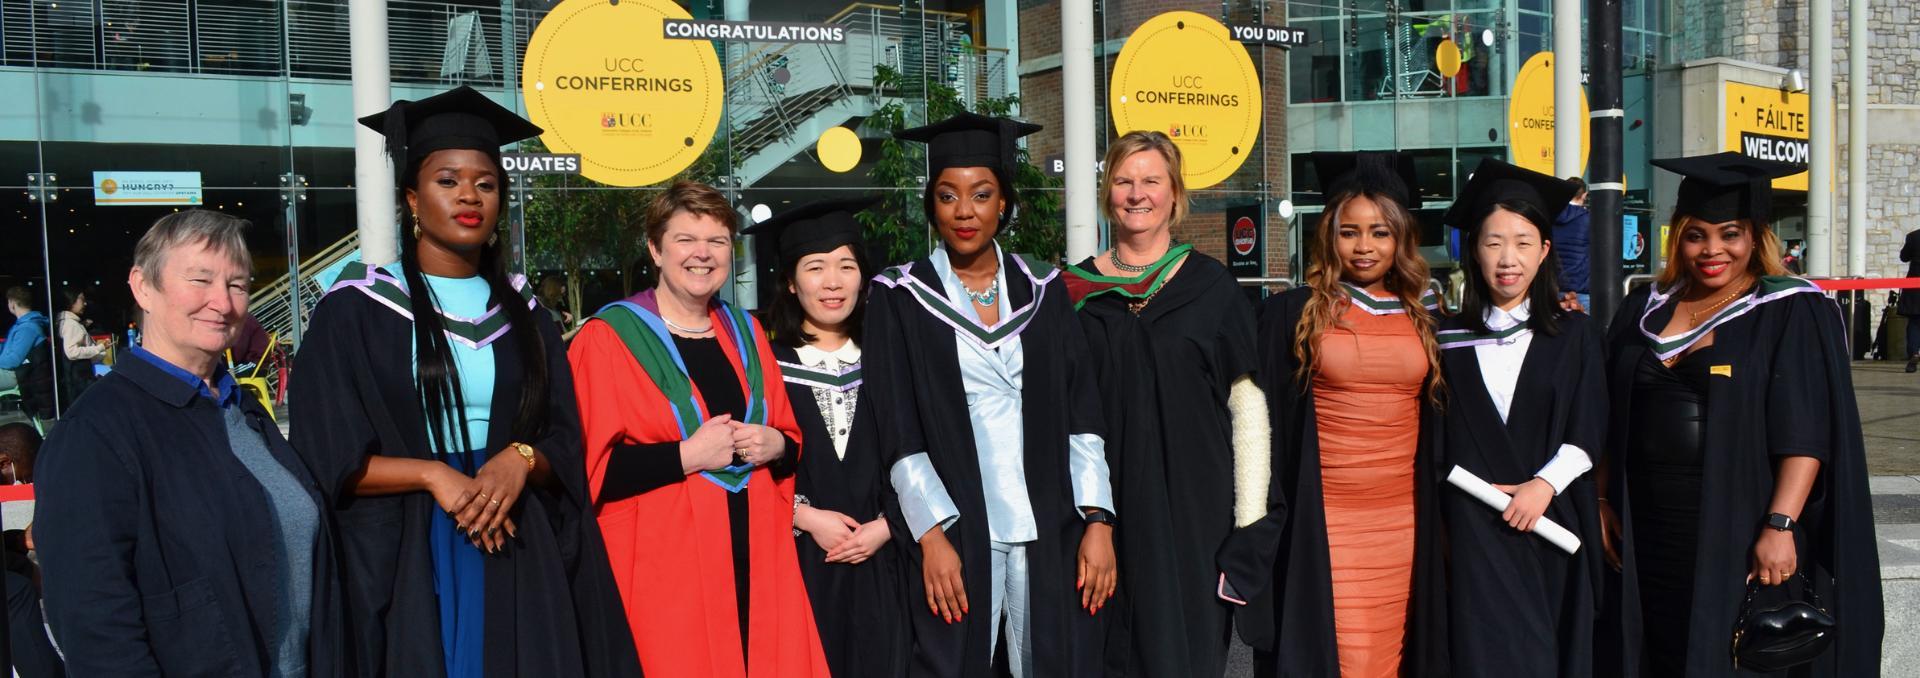 The School of Nursing and Midwifery, University College Cork celebrates with their graduating international students